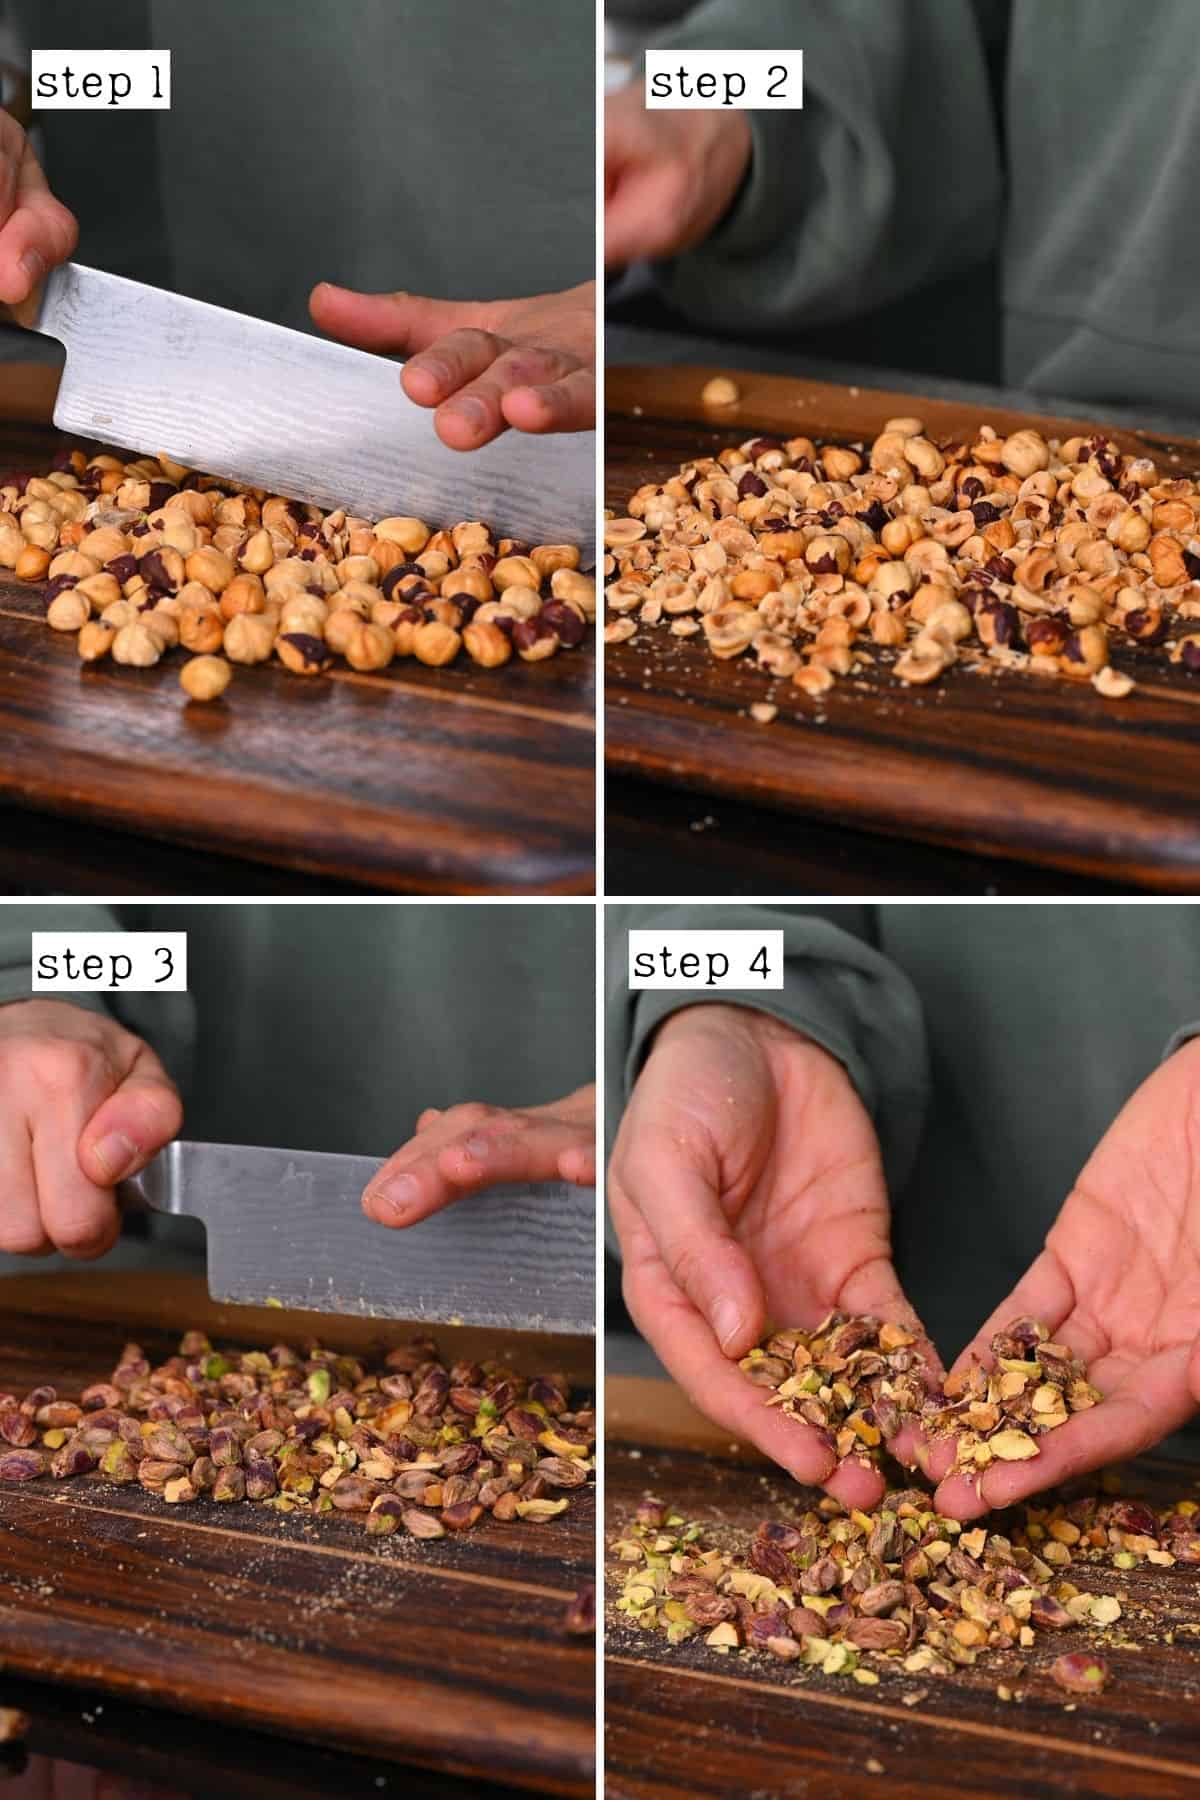 Steps for chopping hazelnuts and pistachios